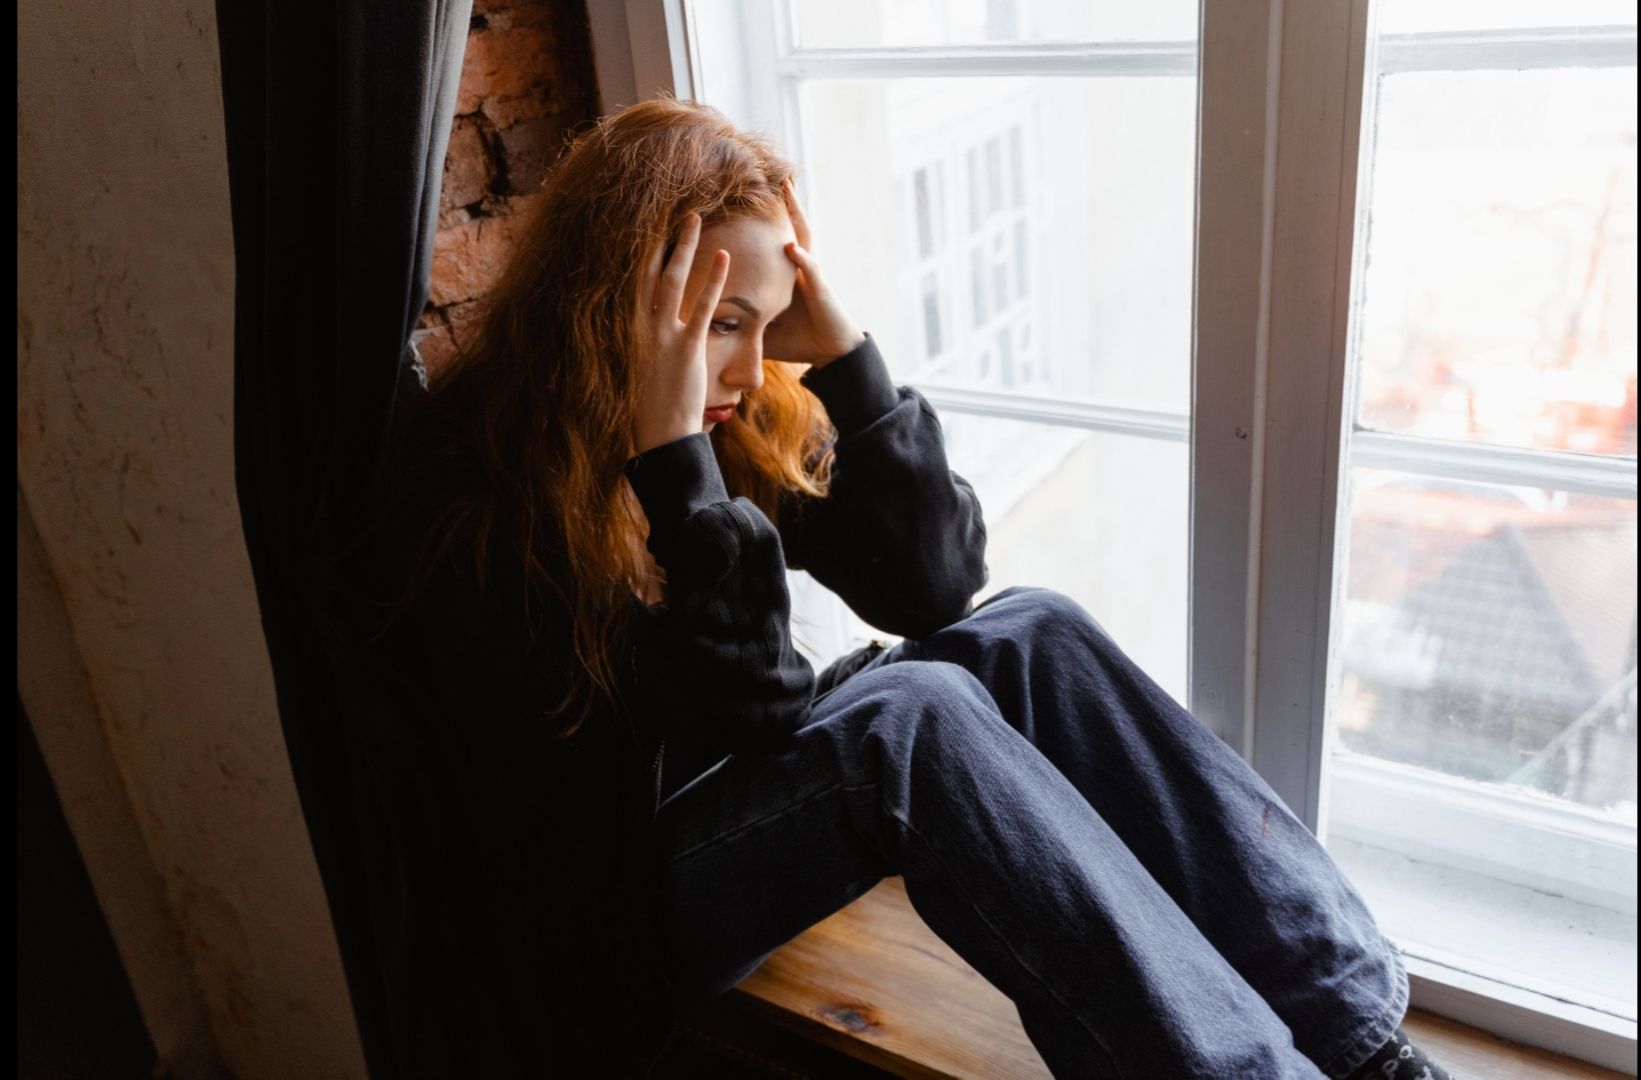 Photo by MART  PRODUCTION: https://www.pexels.com/photo/stressed-woman-sitting-on-window-sill-7278794/